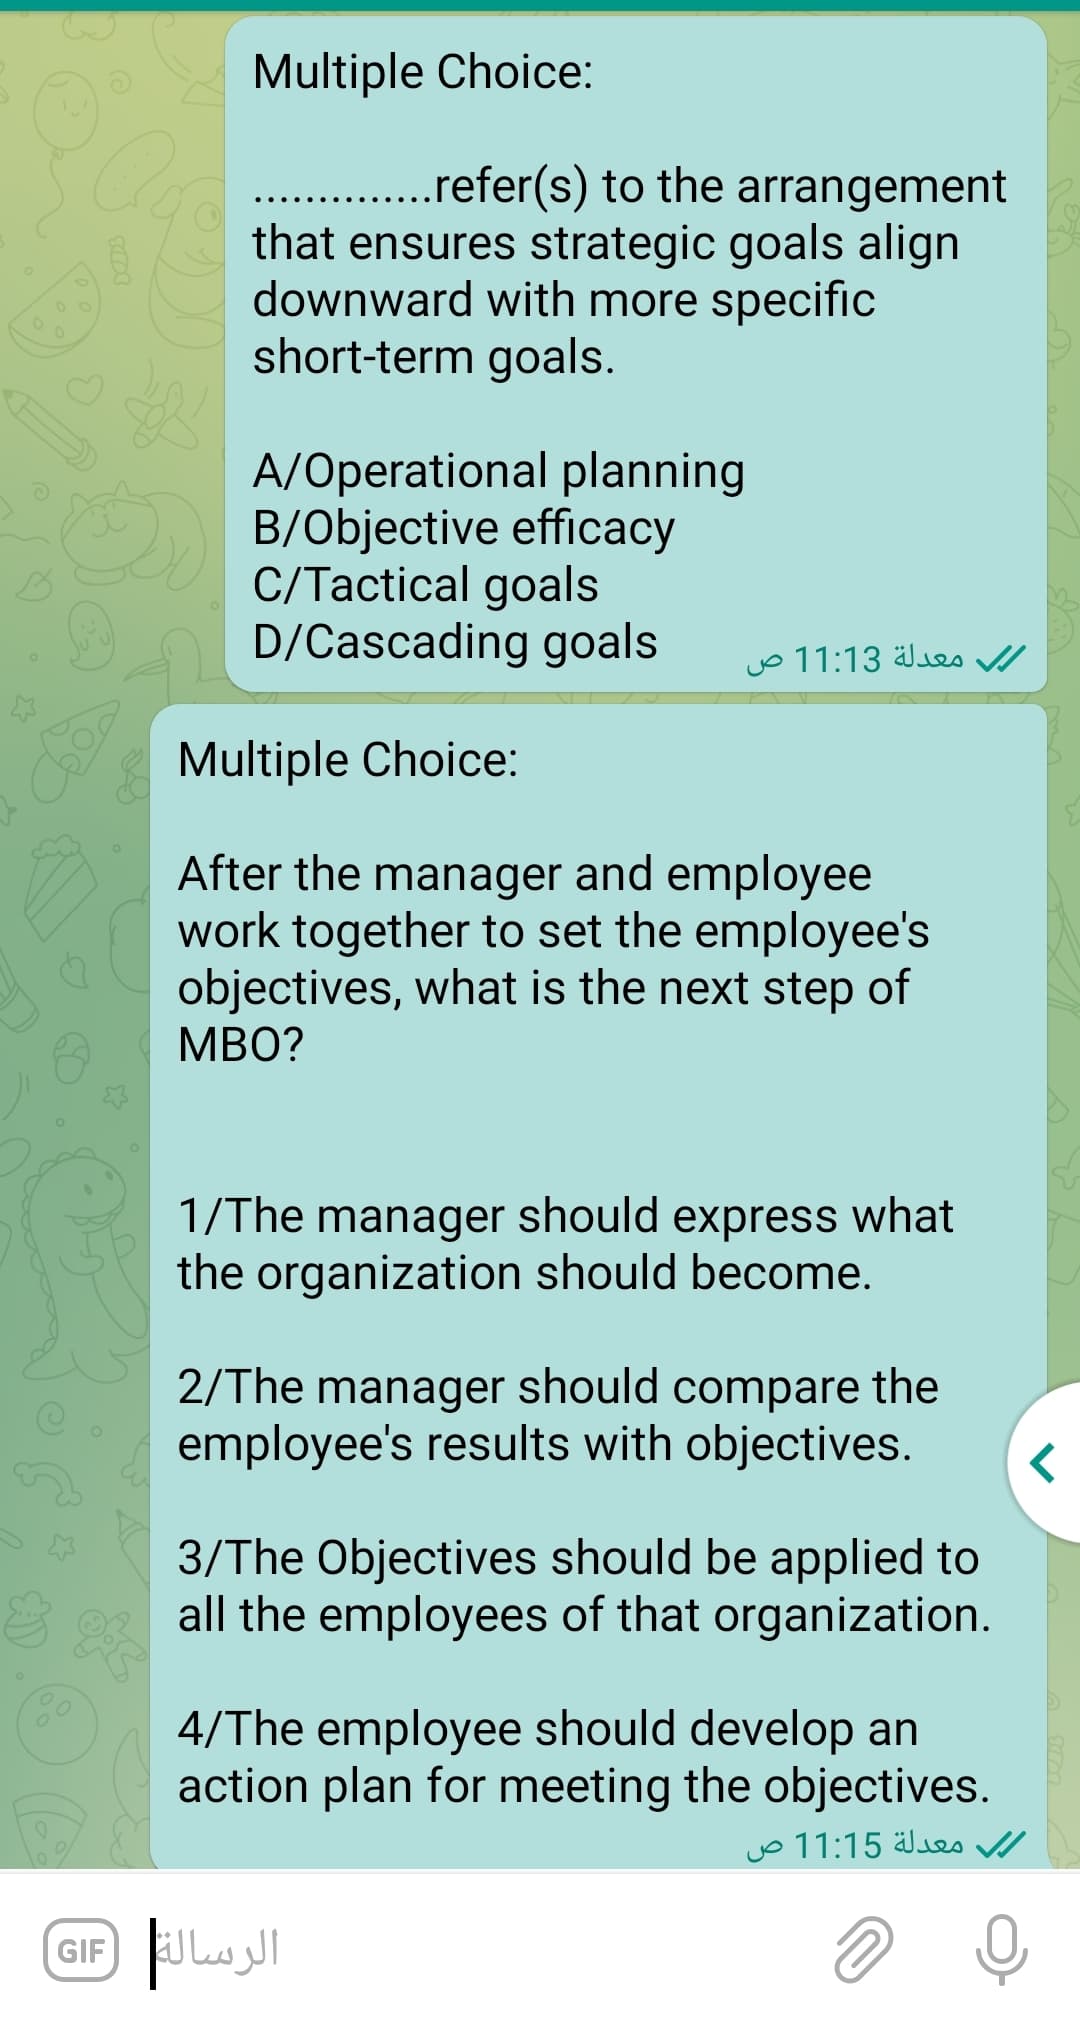 Multiple Choice:
.refer(s) to the arrangement
that ensures strategic goals align
downward with more specific
short-term goals.
A/Operational planning
B/Objective efficacy
C/Tactical goals
D/Cascading goals
معدلة 11:13 ص
Multiple Choice:
After the manager and employee
work together to set the employee's
objectives, what is the next step of
MBO?
1/The manager should express what
the organization should become.
2/The manager should compare the
employee's results with objectives.
3/The Objectives should be applied to
all the employees of that organization.
4/The employee should develop an
action plan for meeting the objectives.
معدلة 11:15 ص
GIF Lul
